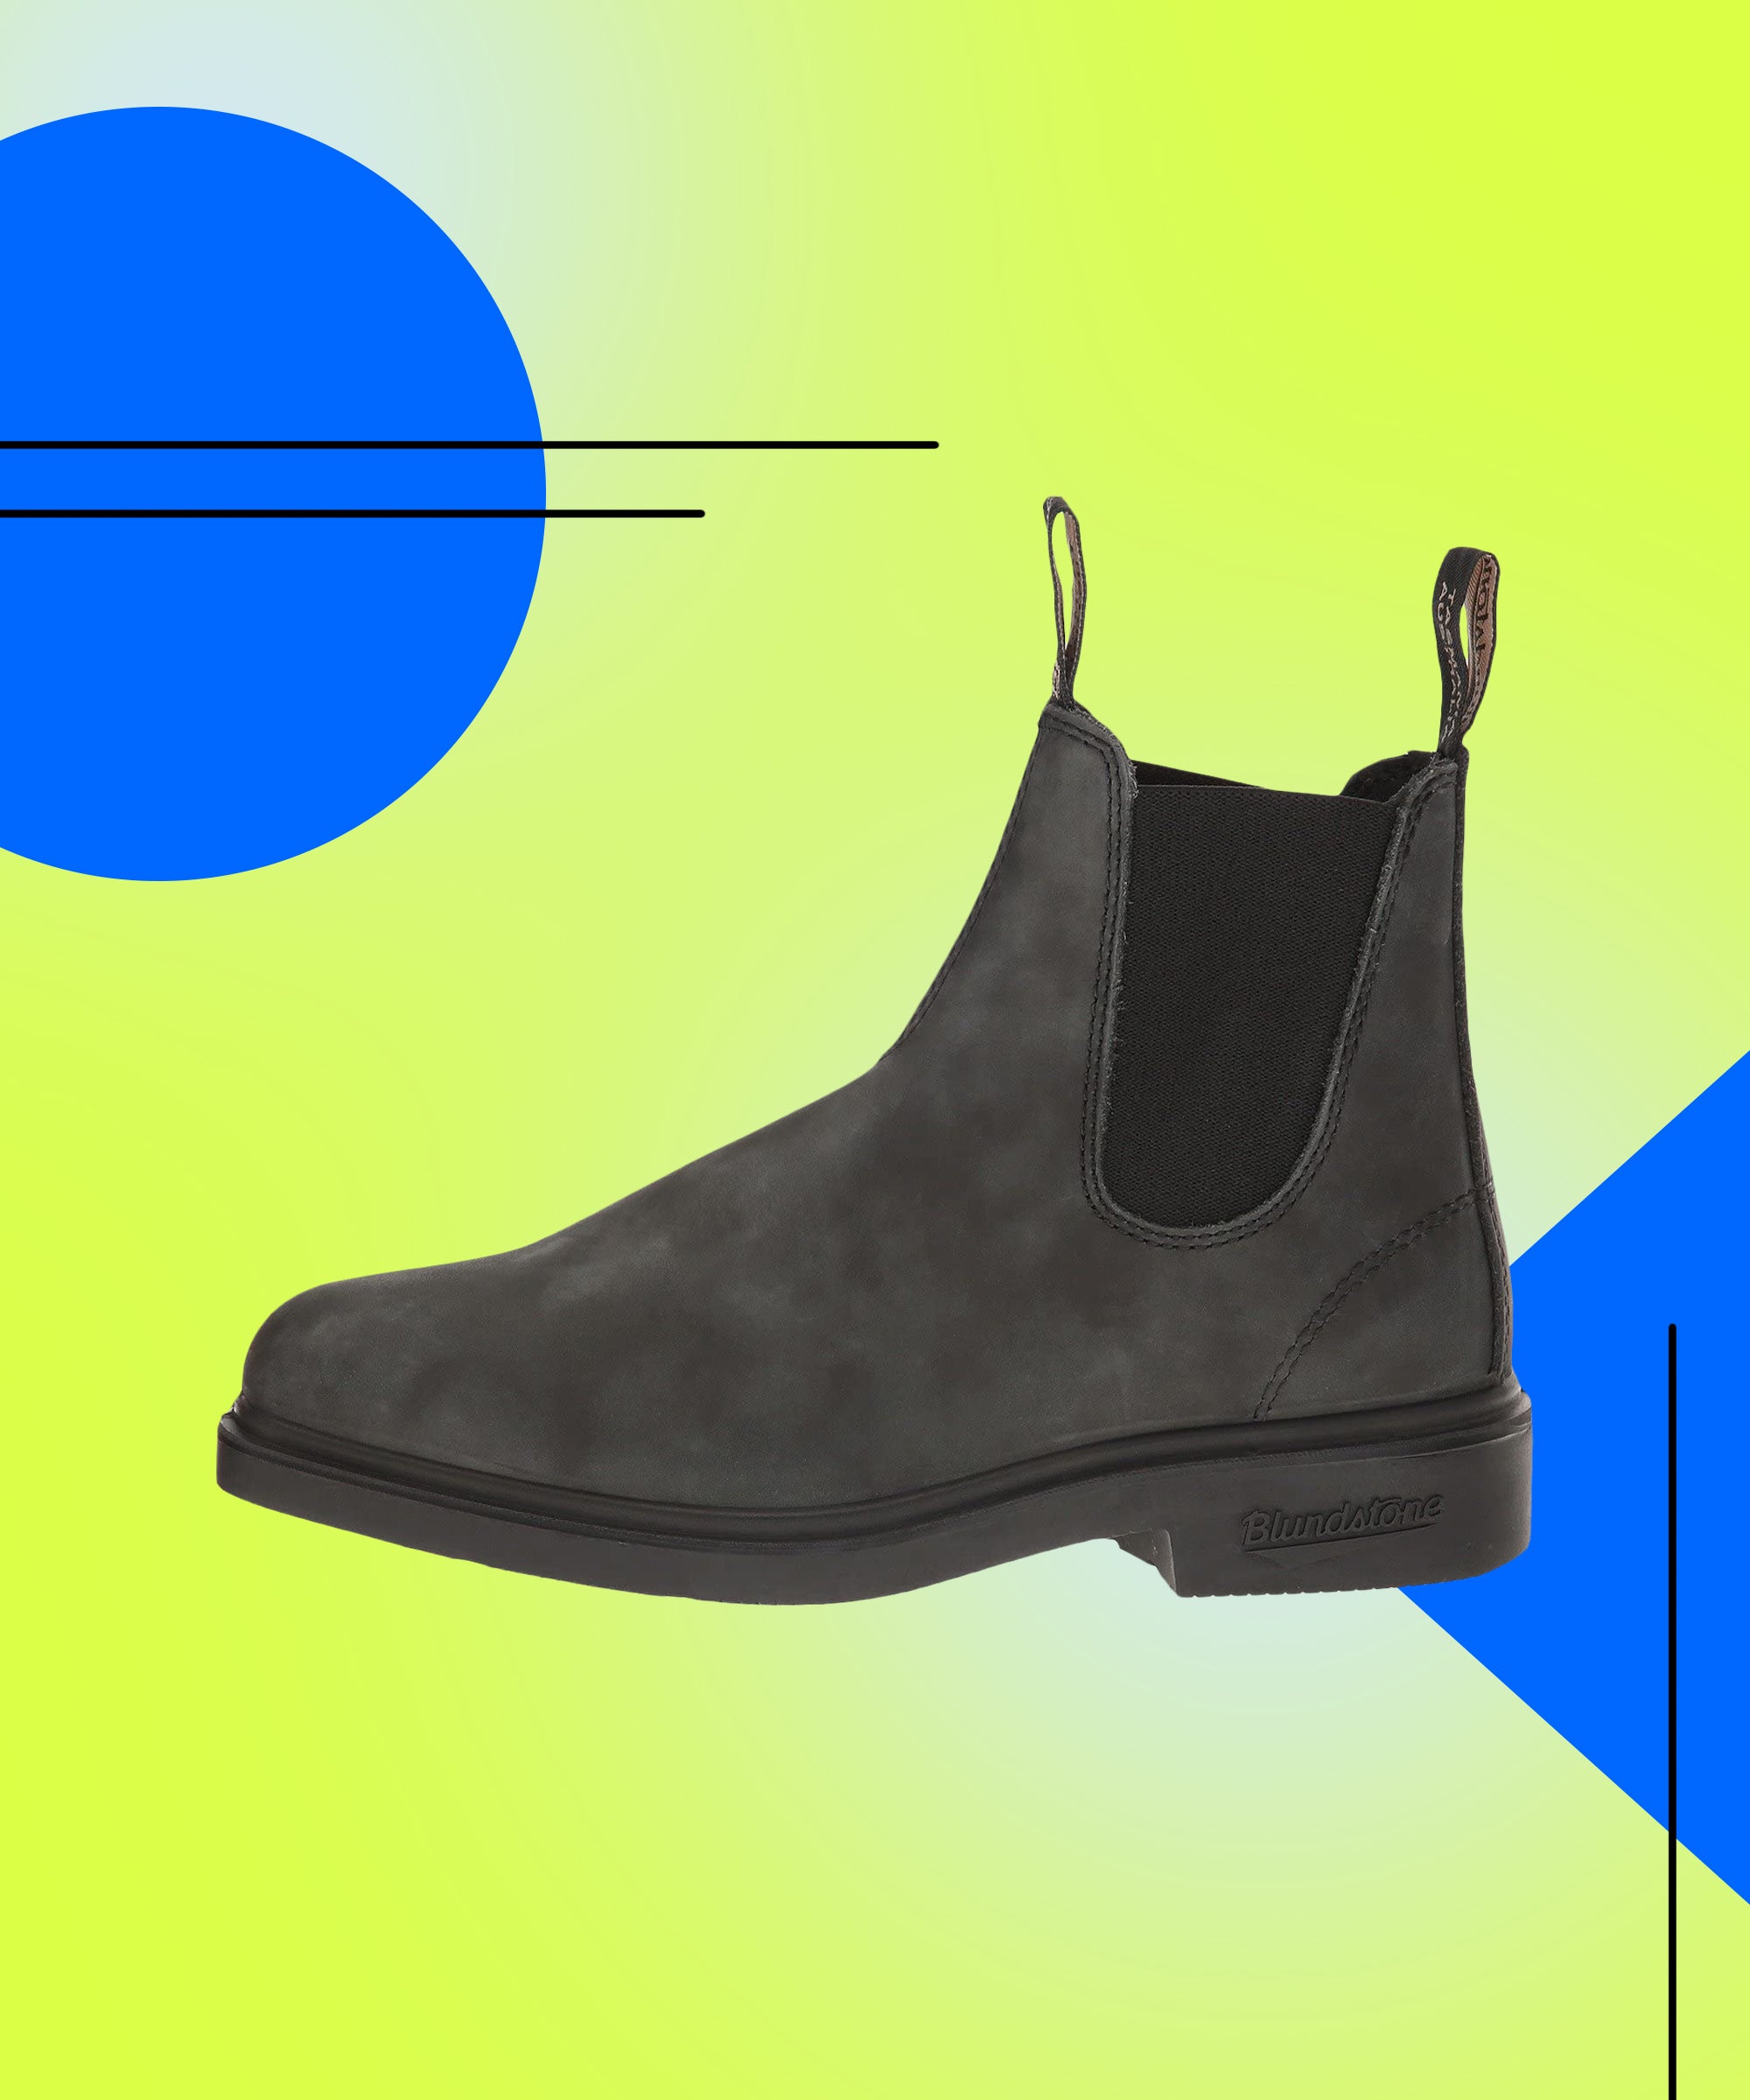 most comfortable chelsea boots